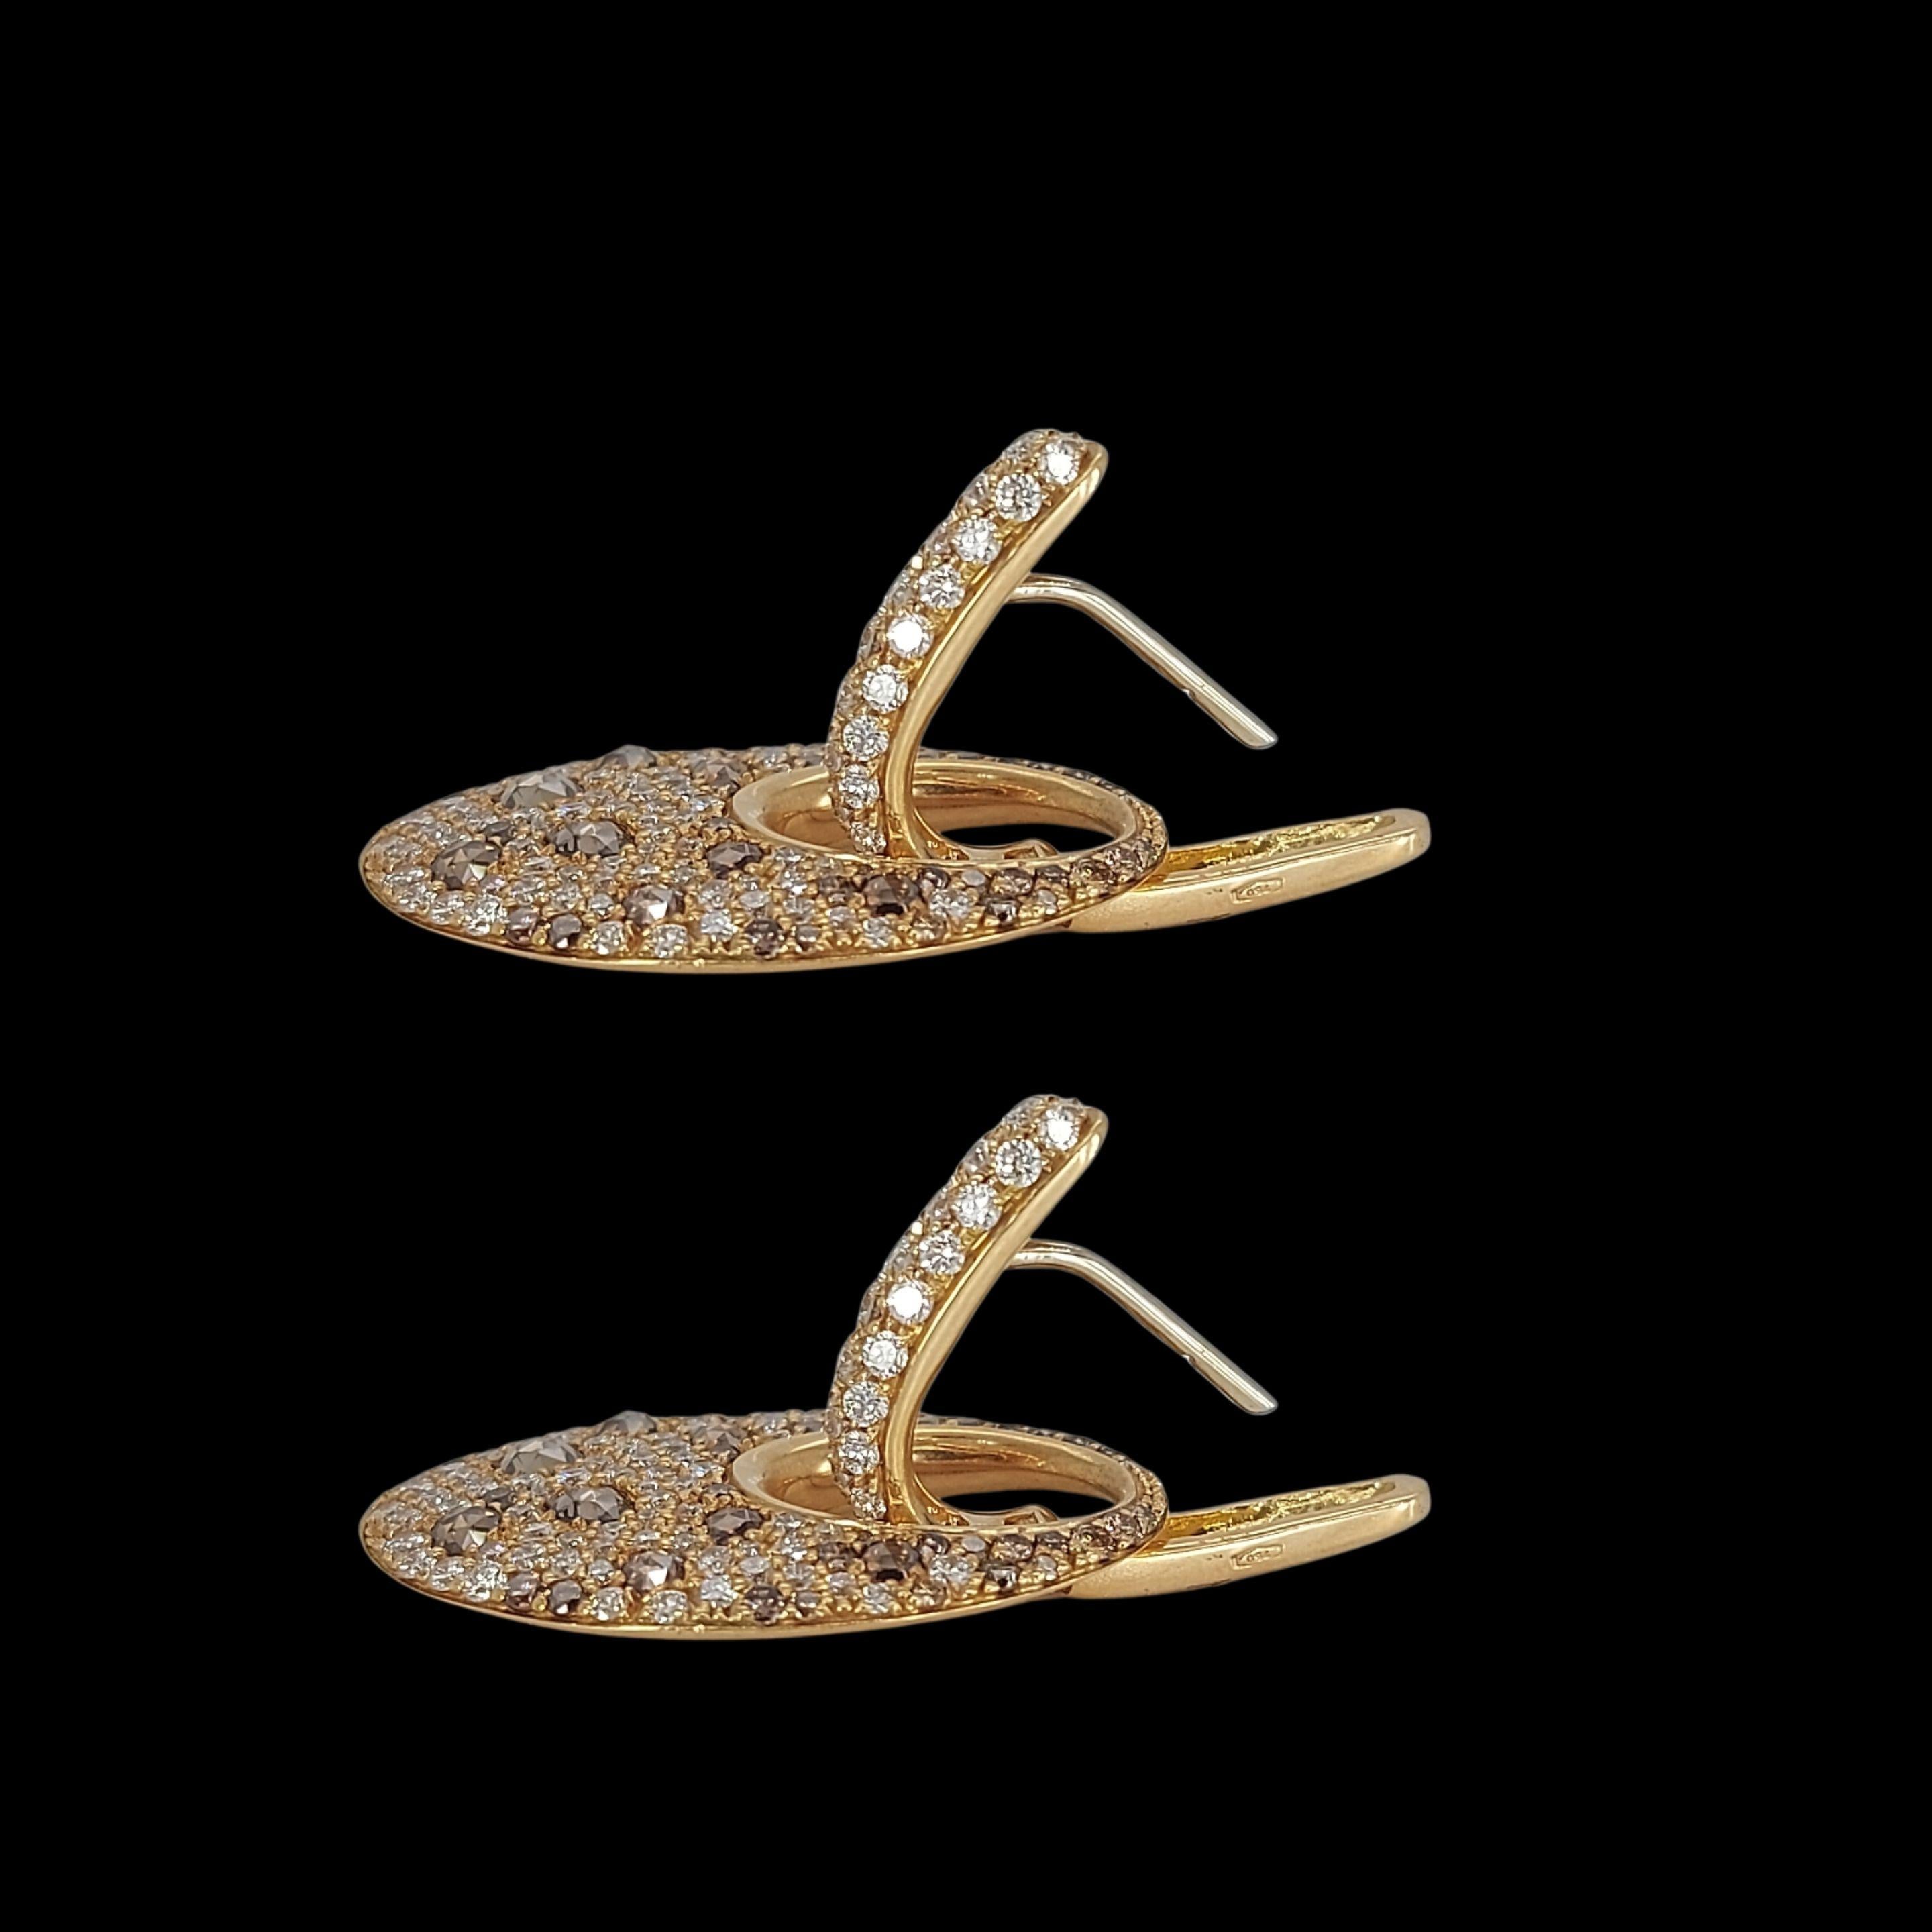 Gorgeous 18kt Pink Gold Earrings With 2.82ct White and Cognac Diamonds

Can be purchased with a matching necklace as seen on the pictures. Item LU175229667452

Diamonds: White and cognac diamonds together approx. 2.82ct

Material: 18kt pink